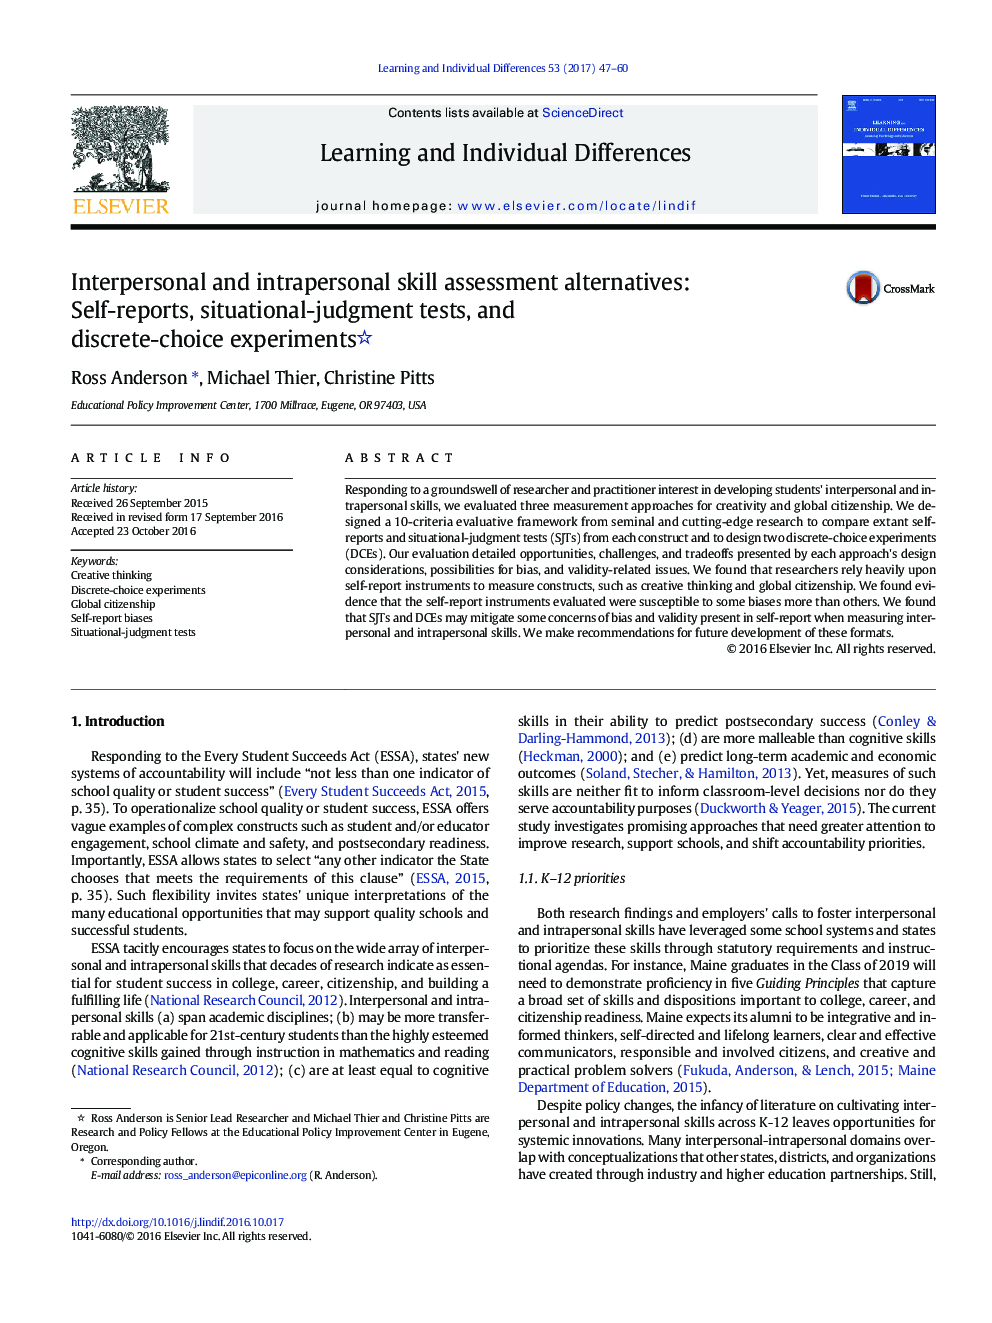 Interpersonal and intrapersonal skill assessment alternatives: Self-reports, situational-judgment tests, and discrete-choice experiments